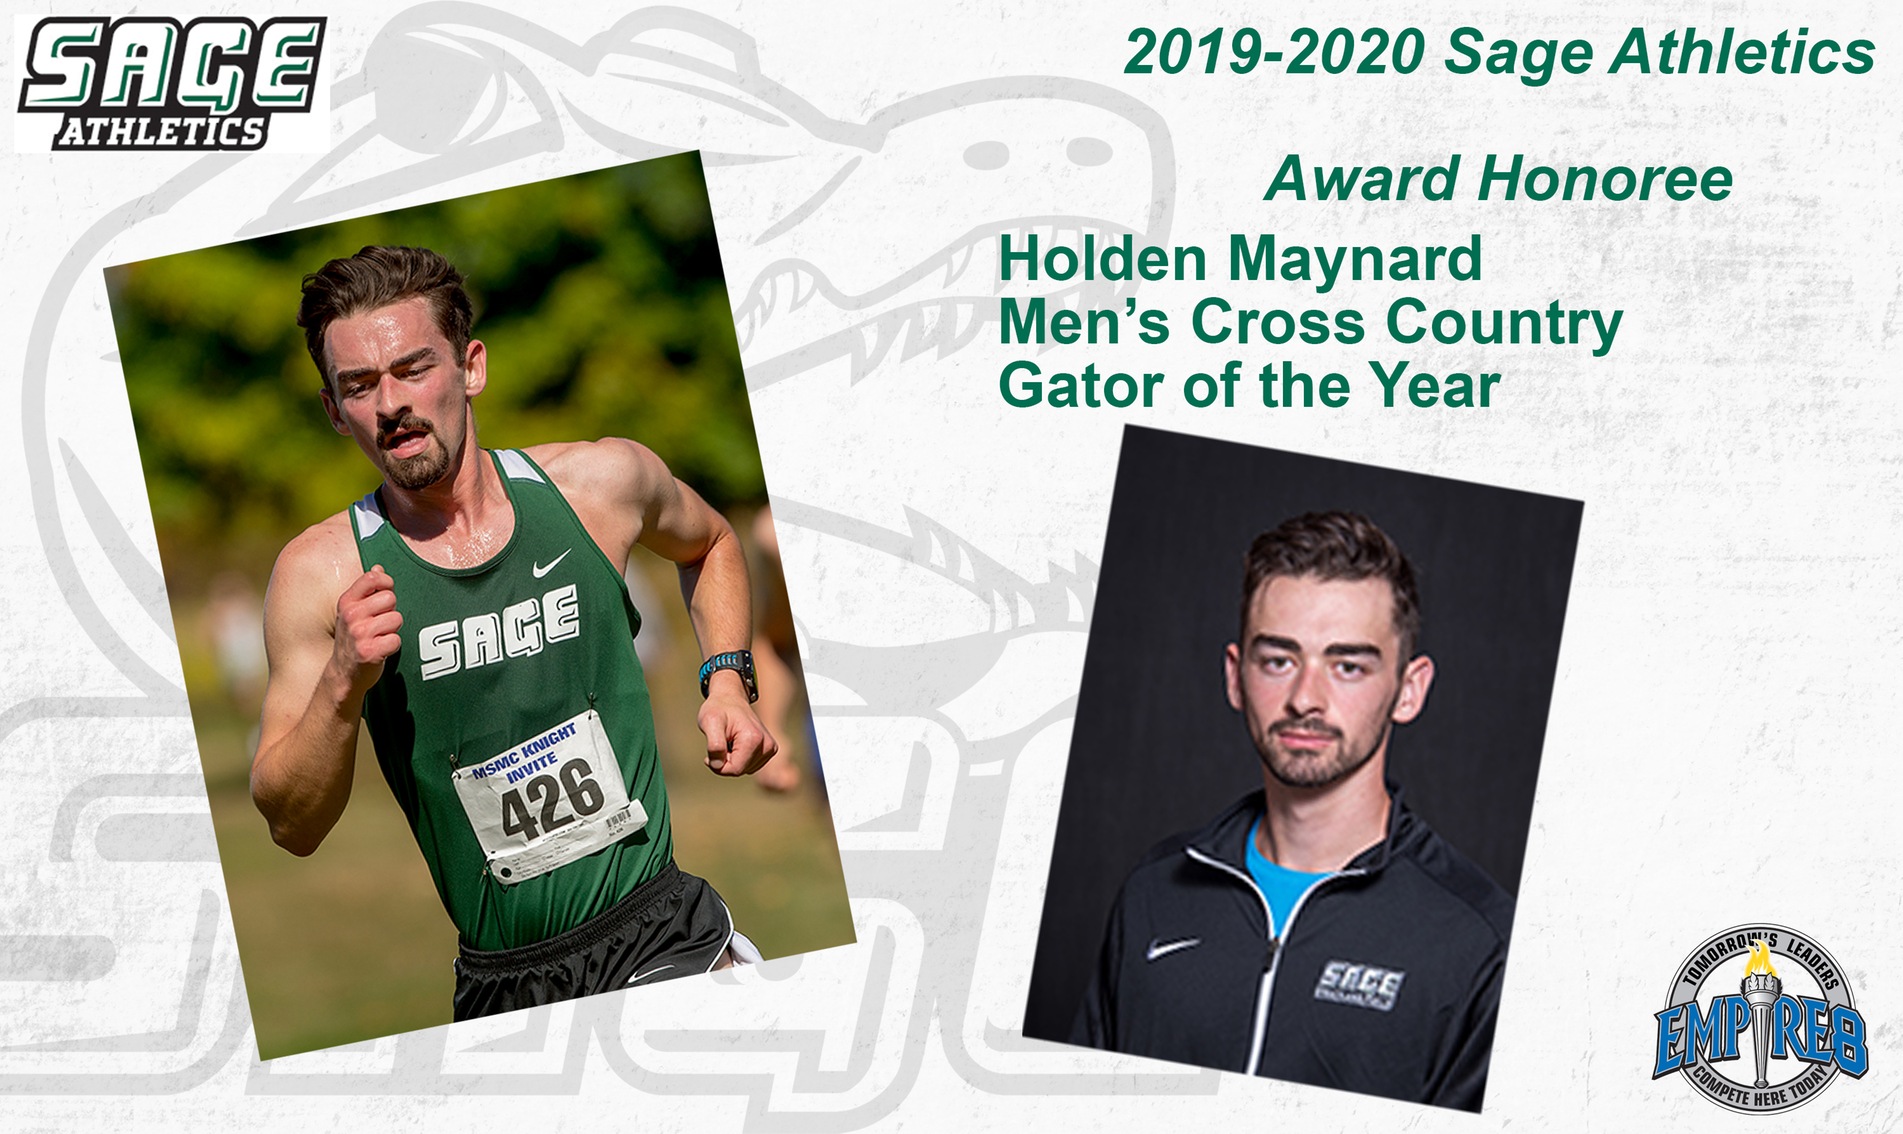 Holden Maynard picked as men's cross country Gator of the Year